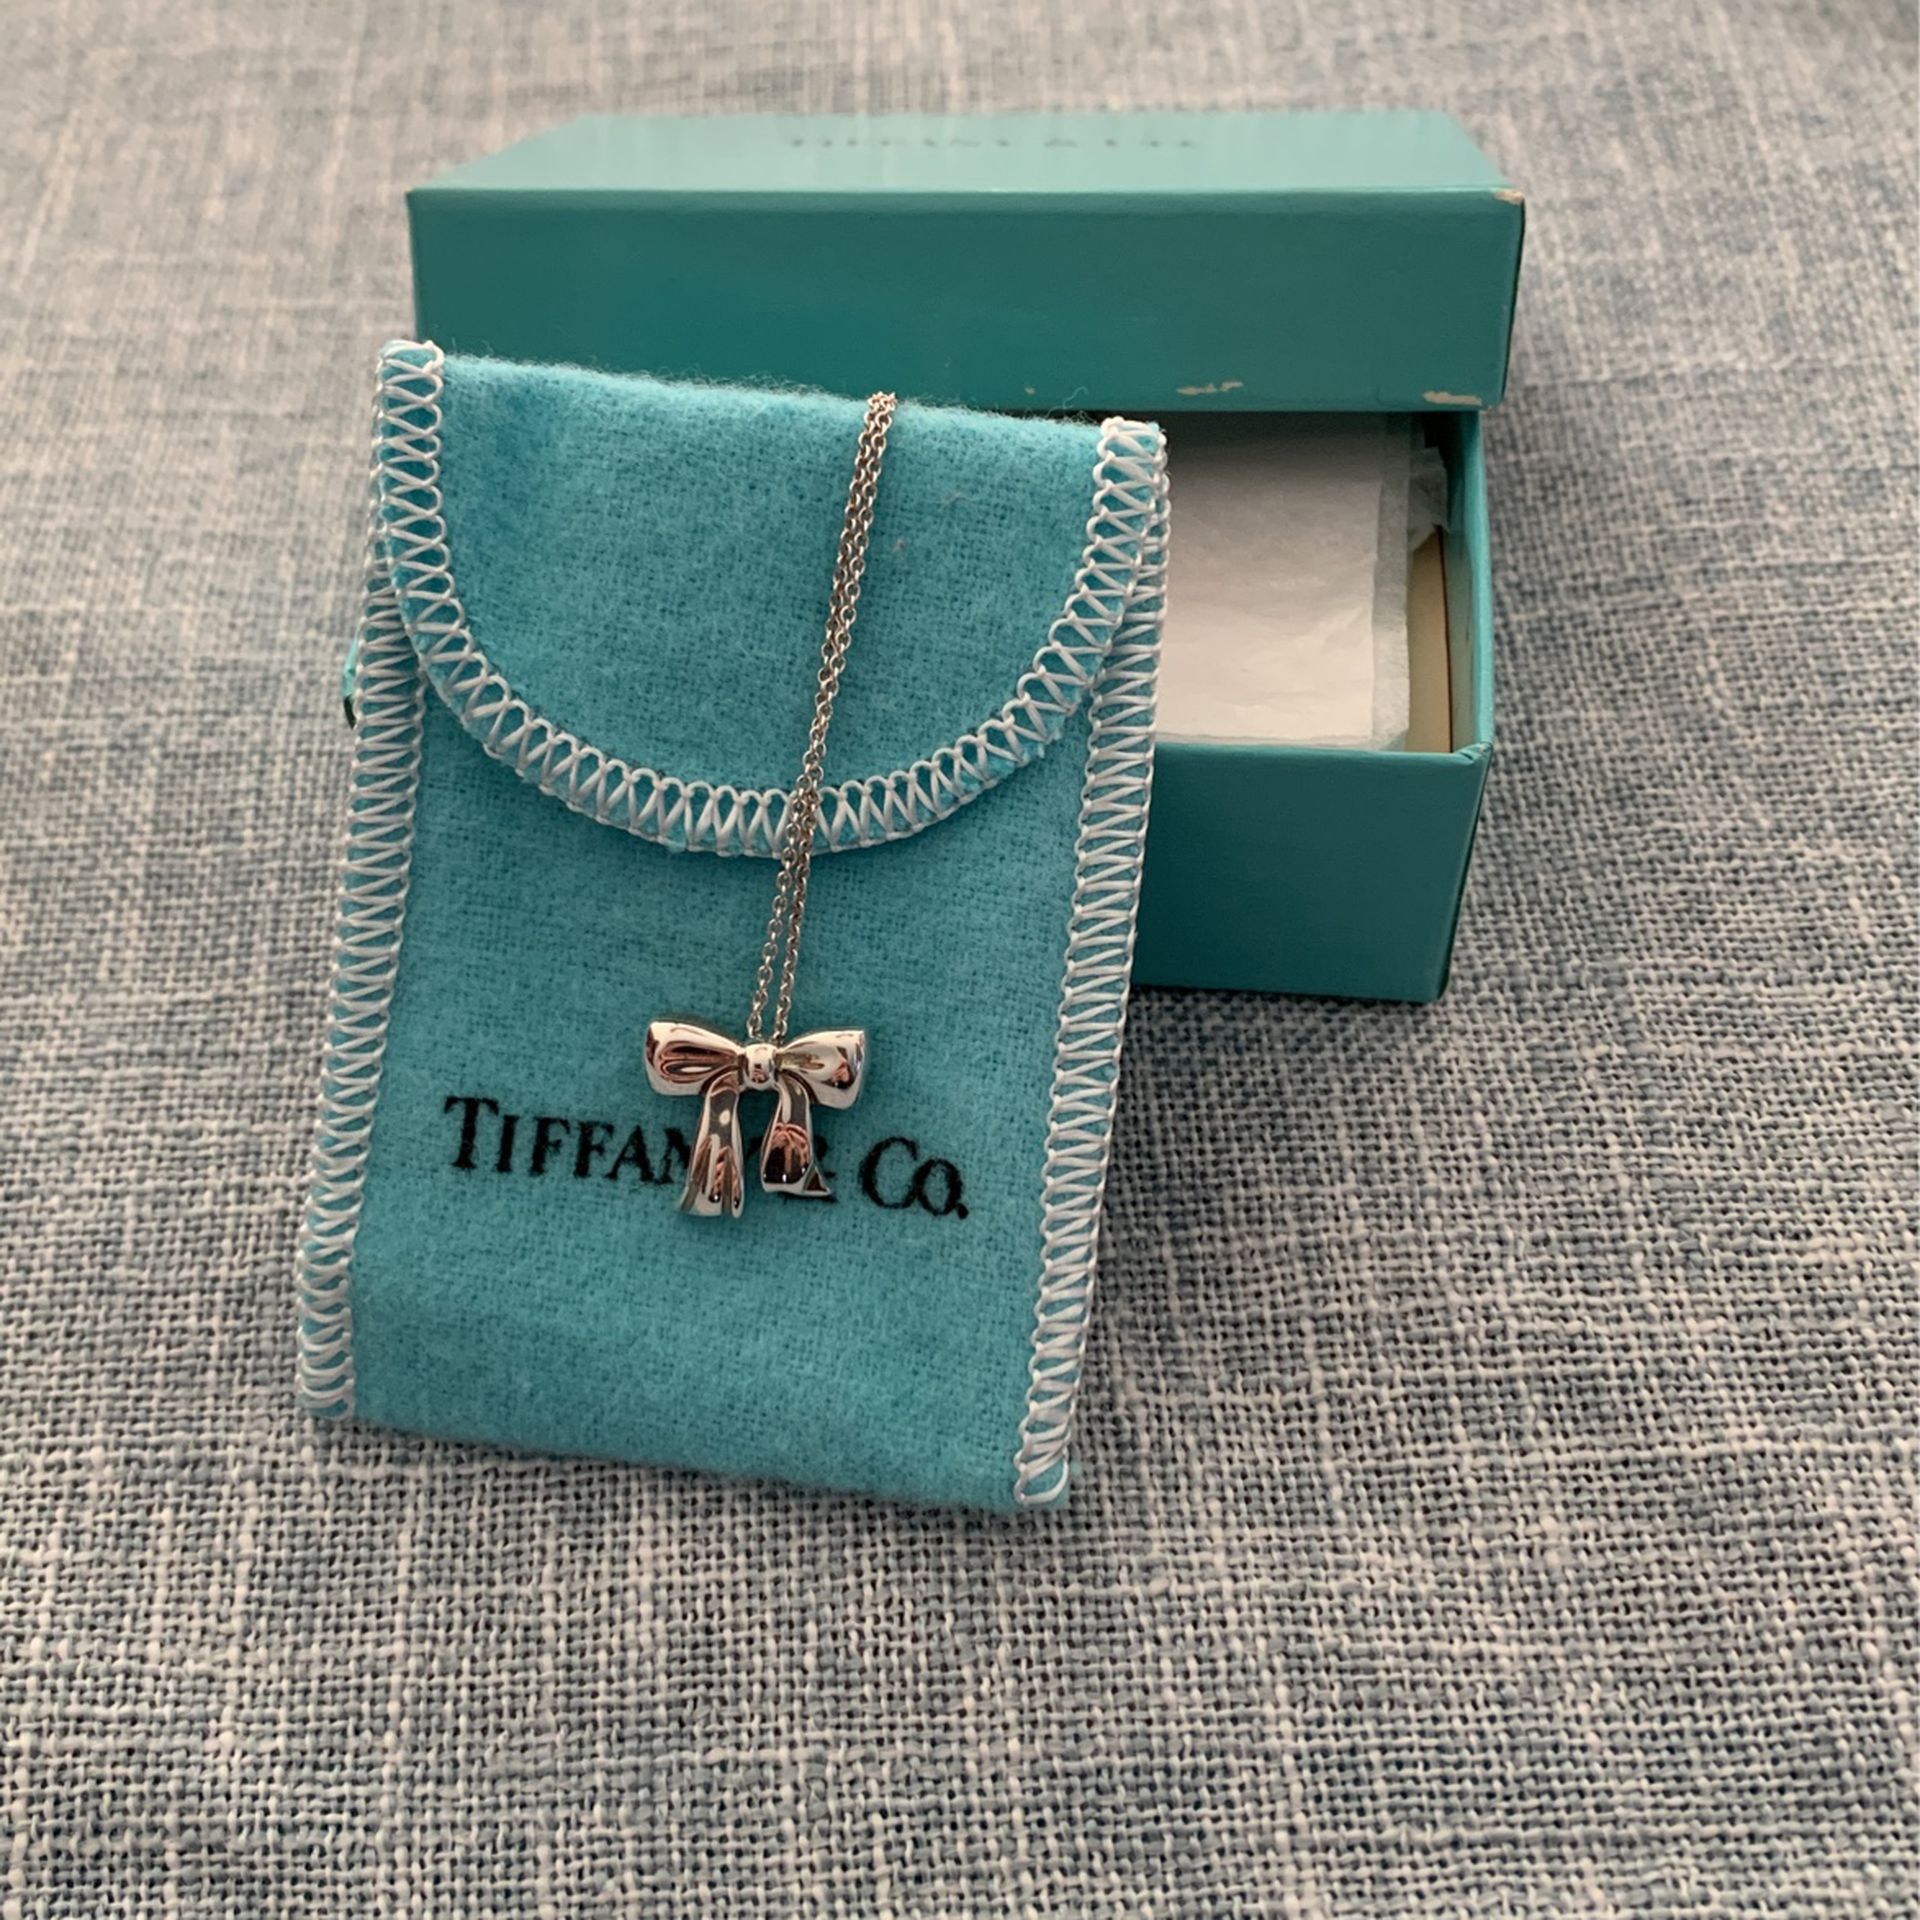 Vintage Tiffany And Co. Sterling Sliver Bow Necklace